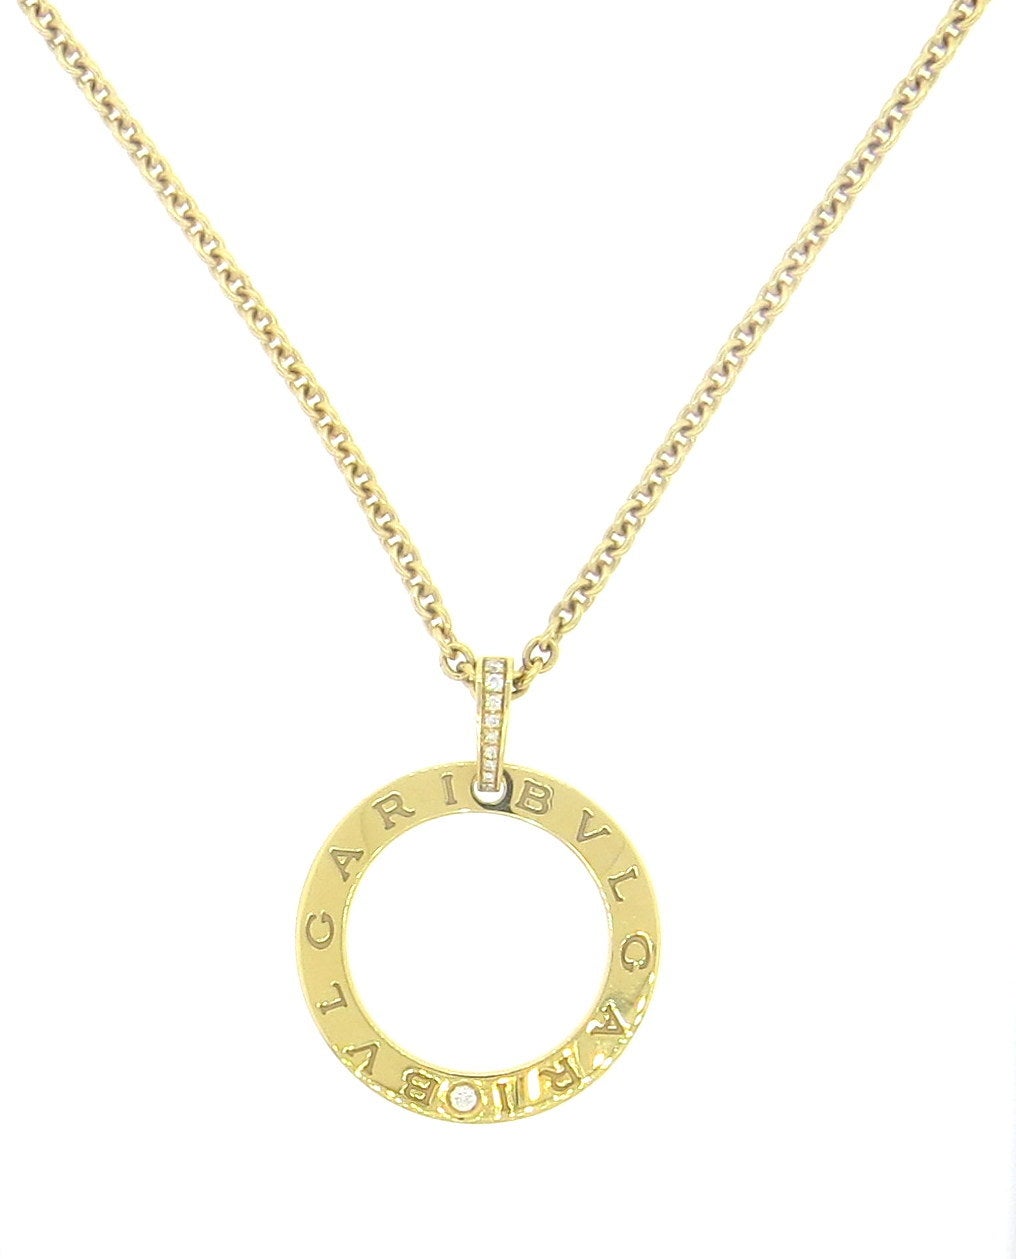 18k gold necklace with pendant, crafted by Bulgari, decorated with diamonds. Necklace is adjustable up to 22